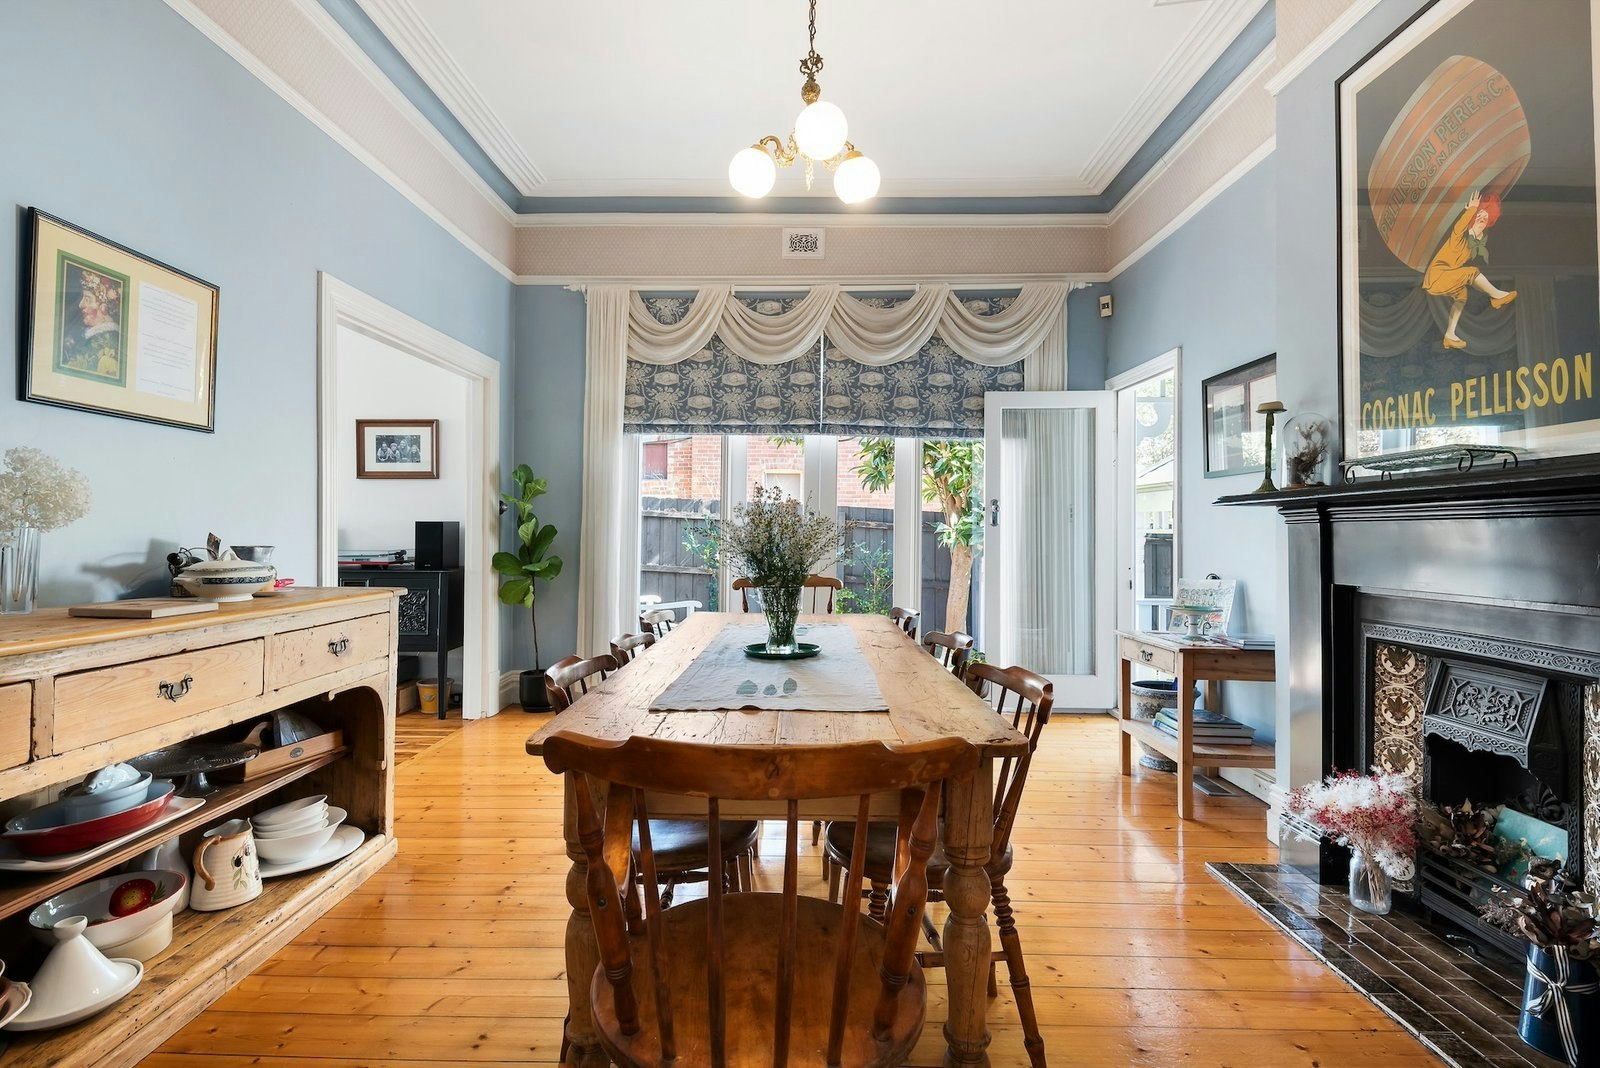 Image of dining room